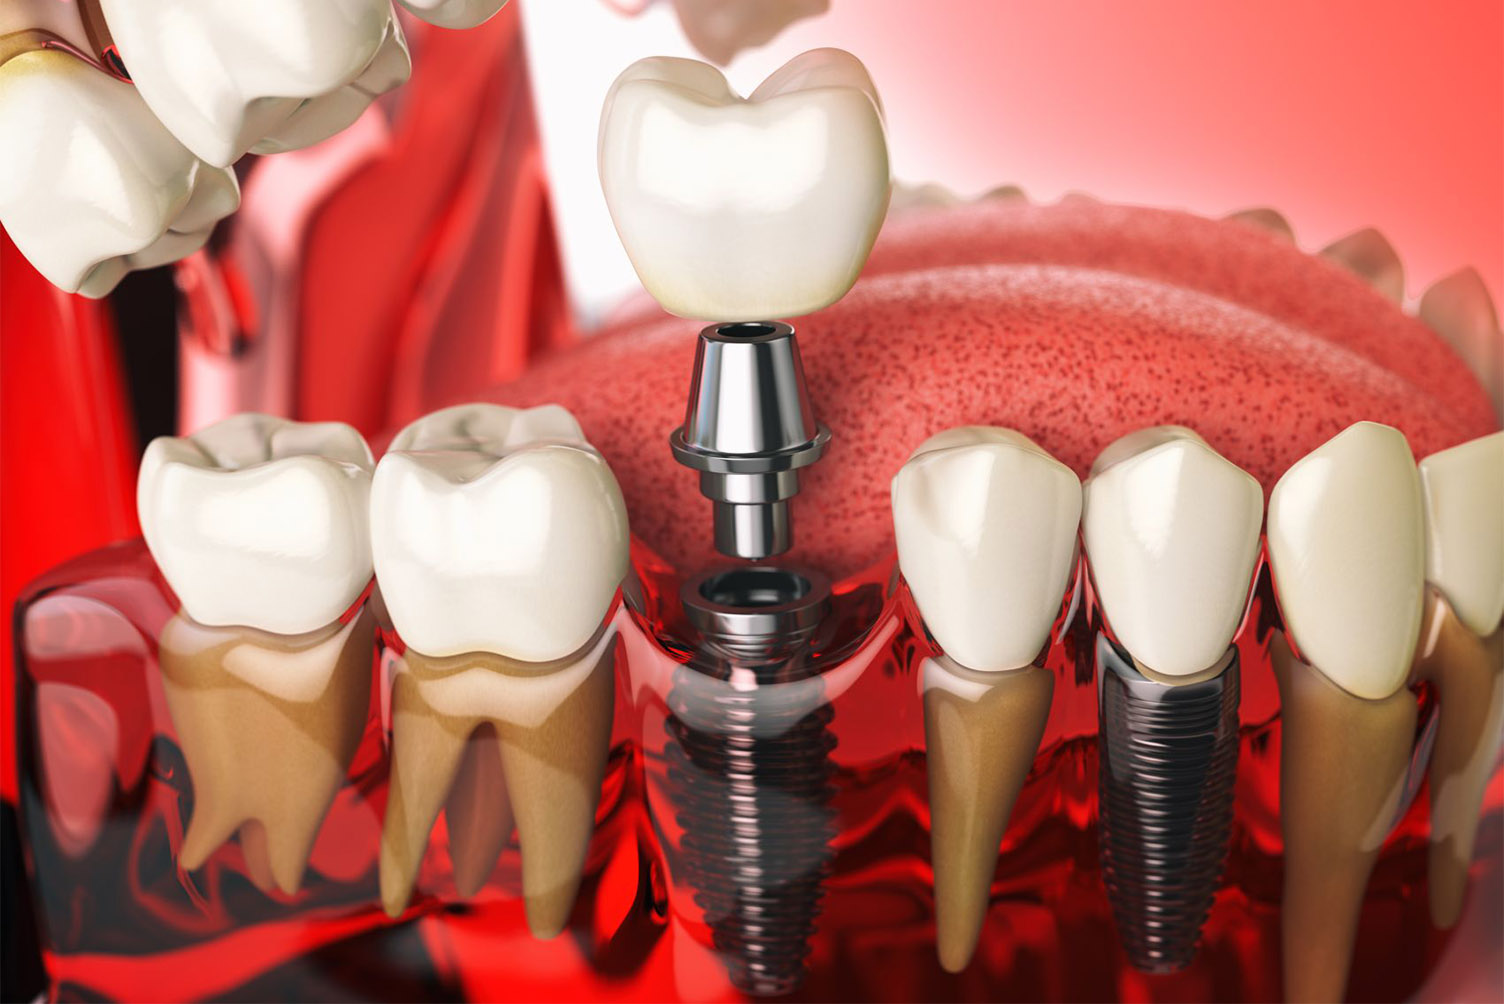 What’s new in dental implantology?